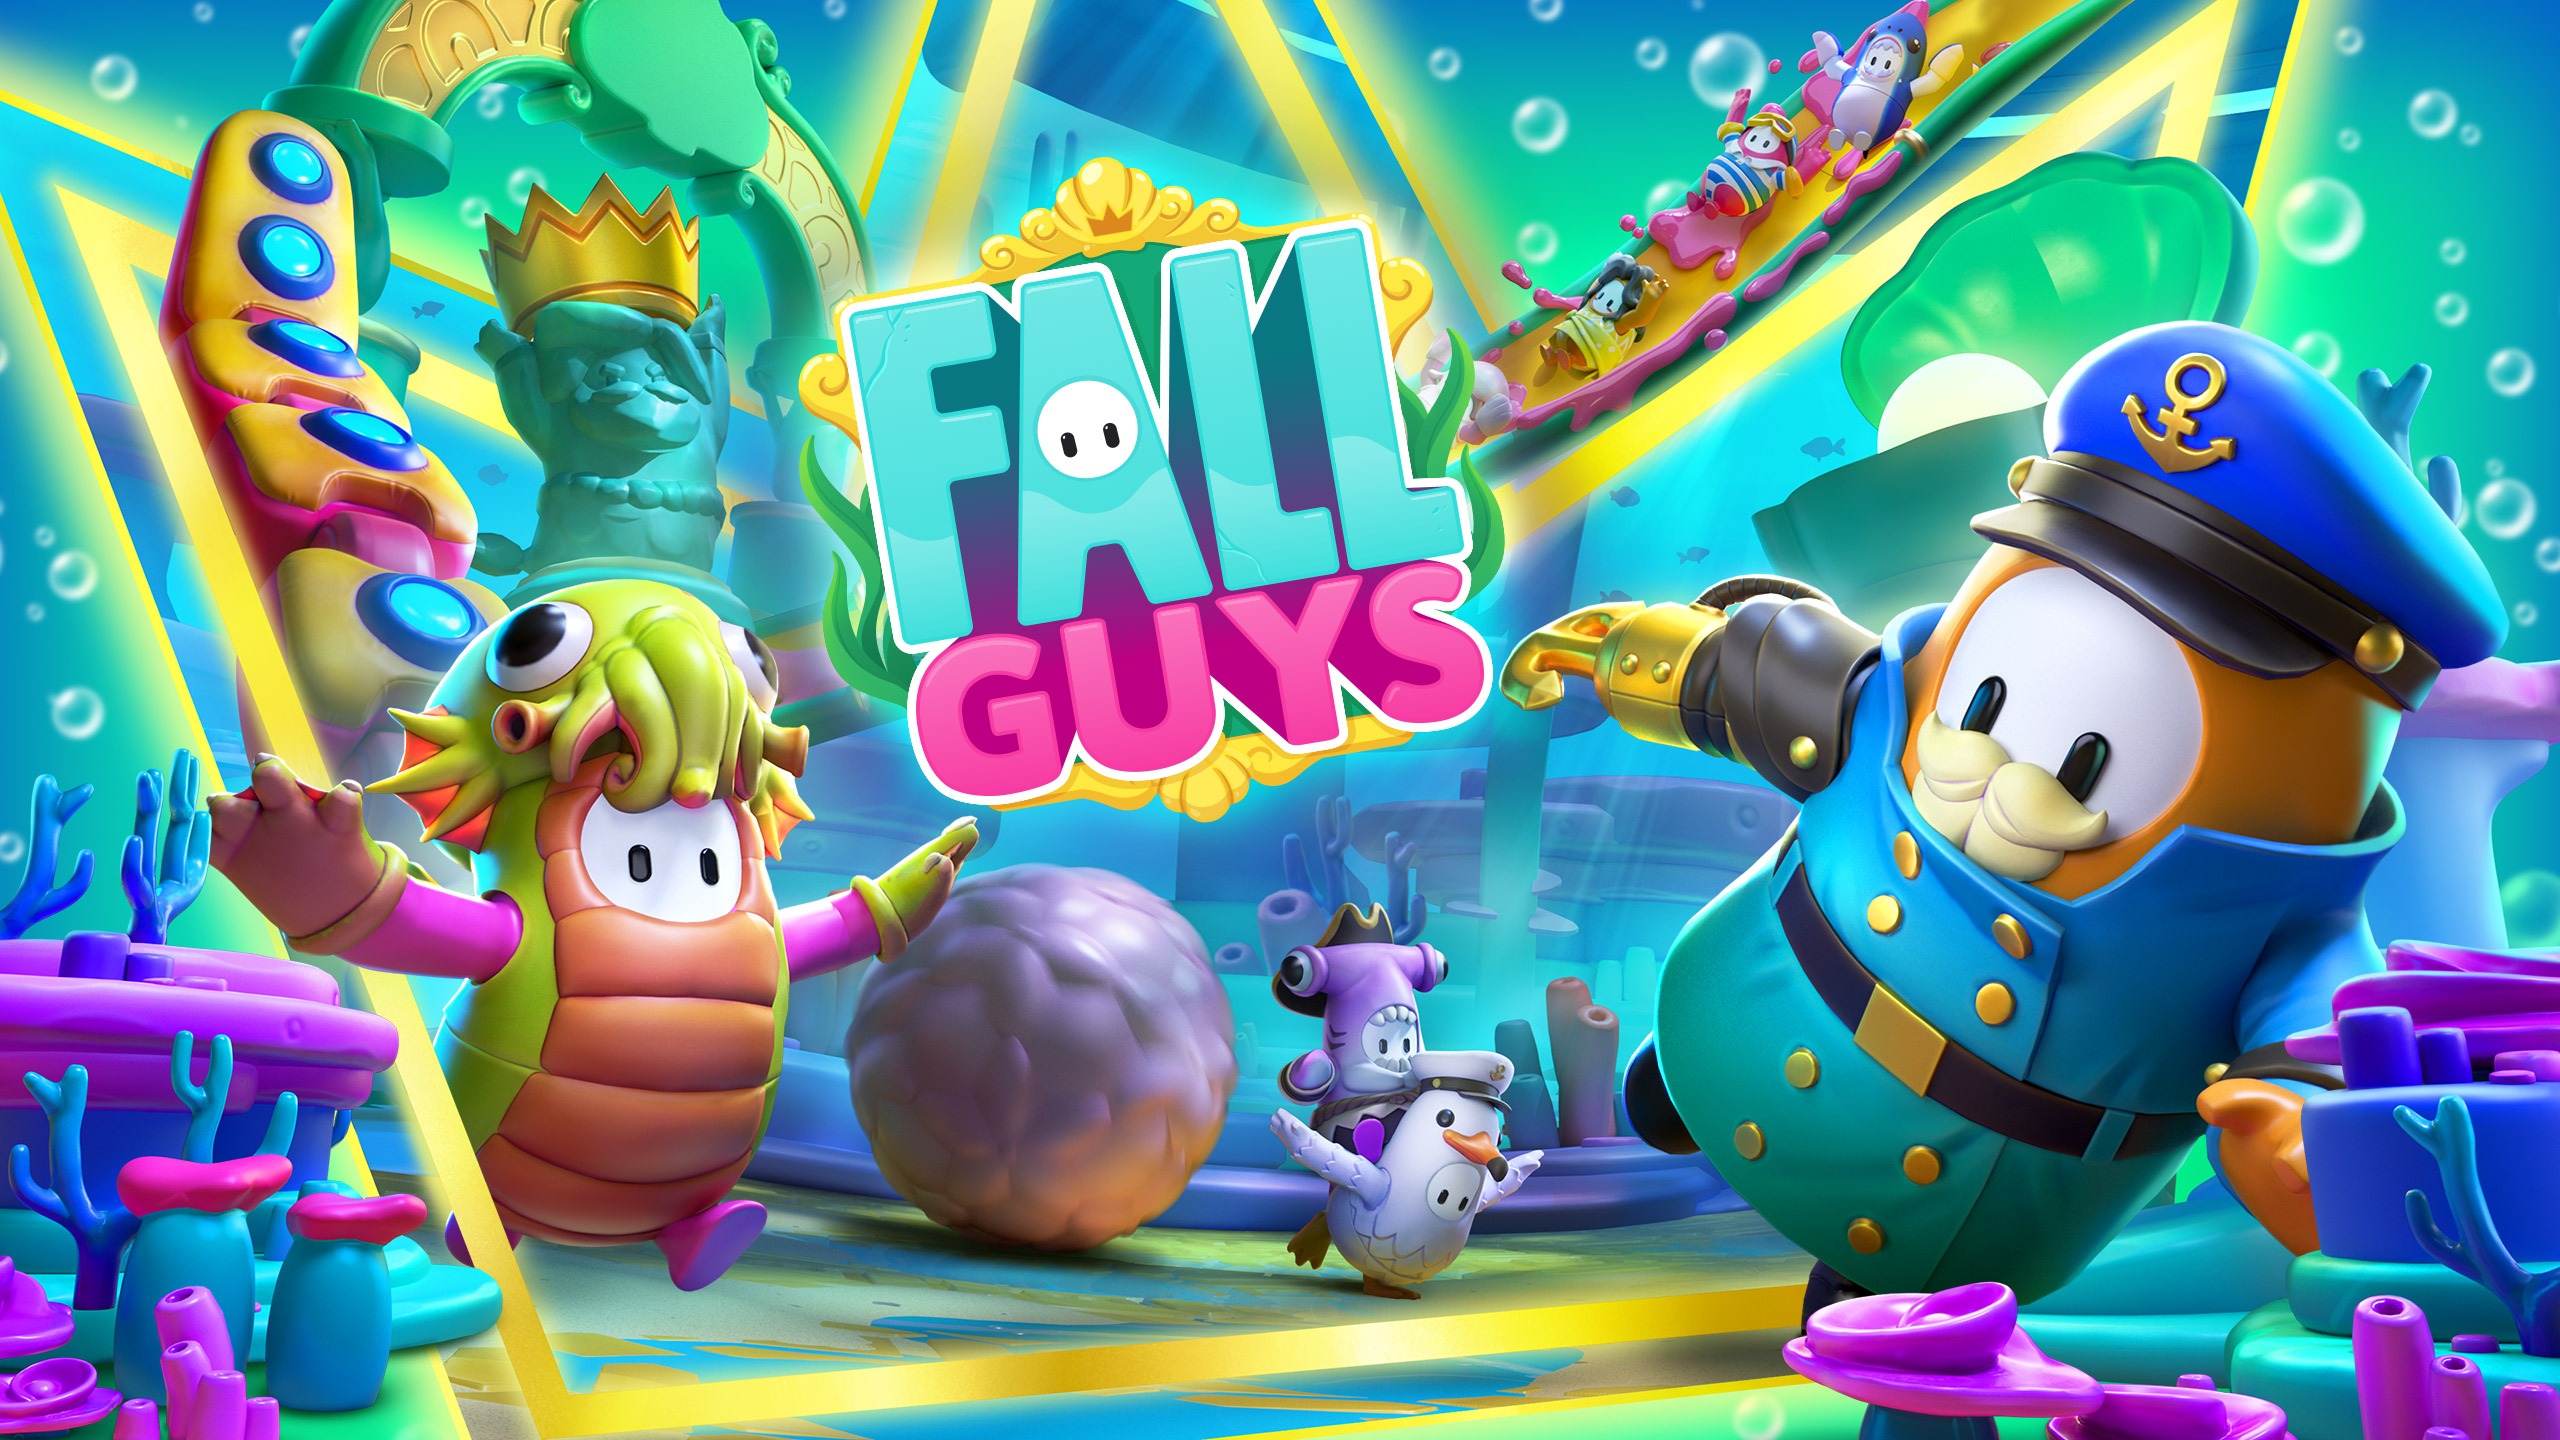 Fall Guys download – how to get it on Switch and mobile